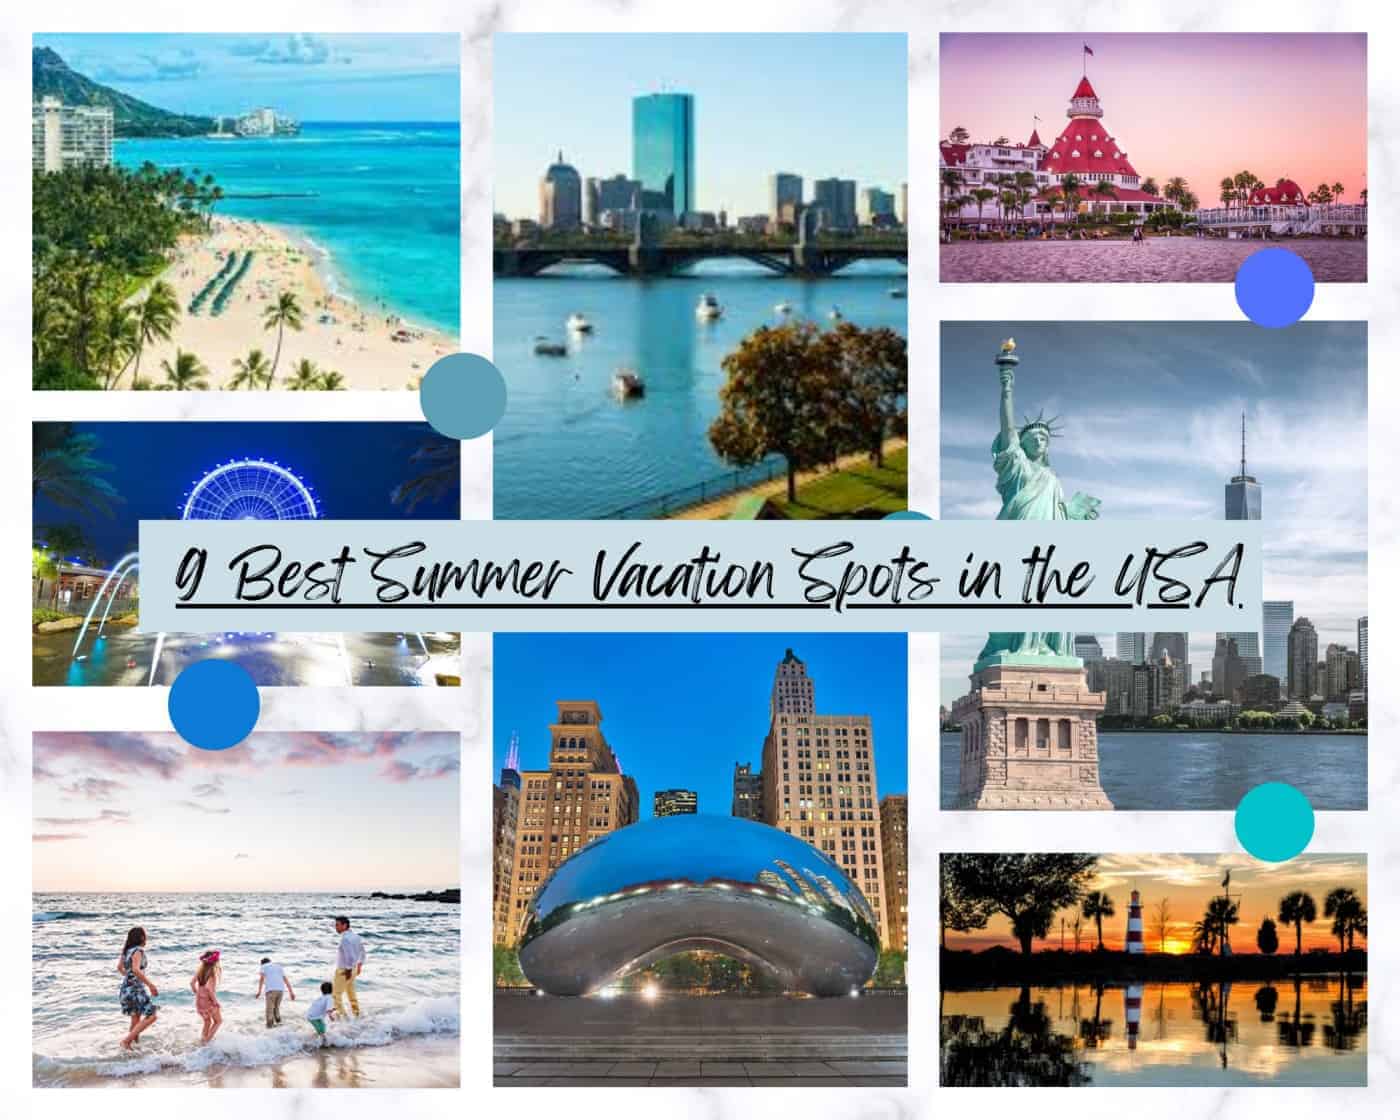 9 Best Summer Vacation Spots in the USA
